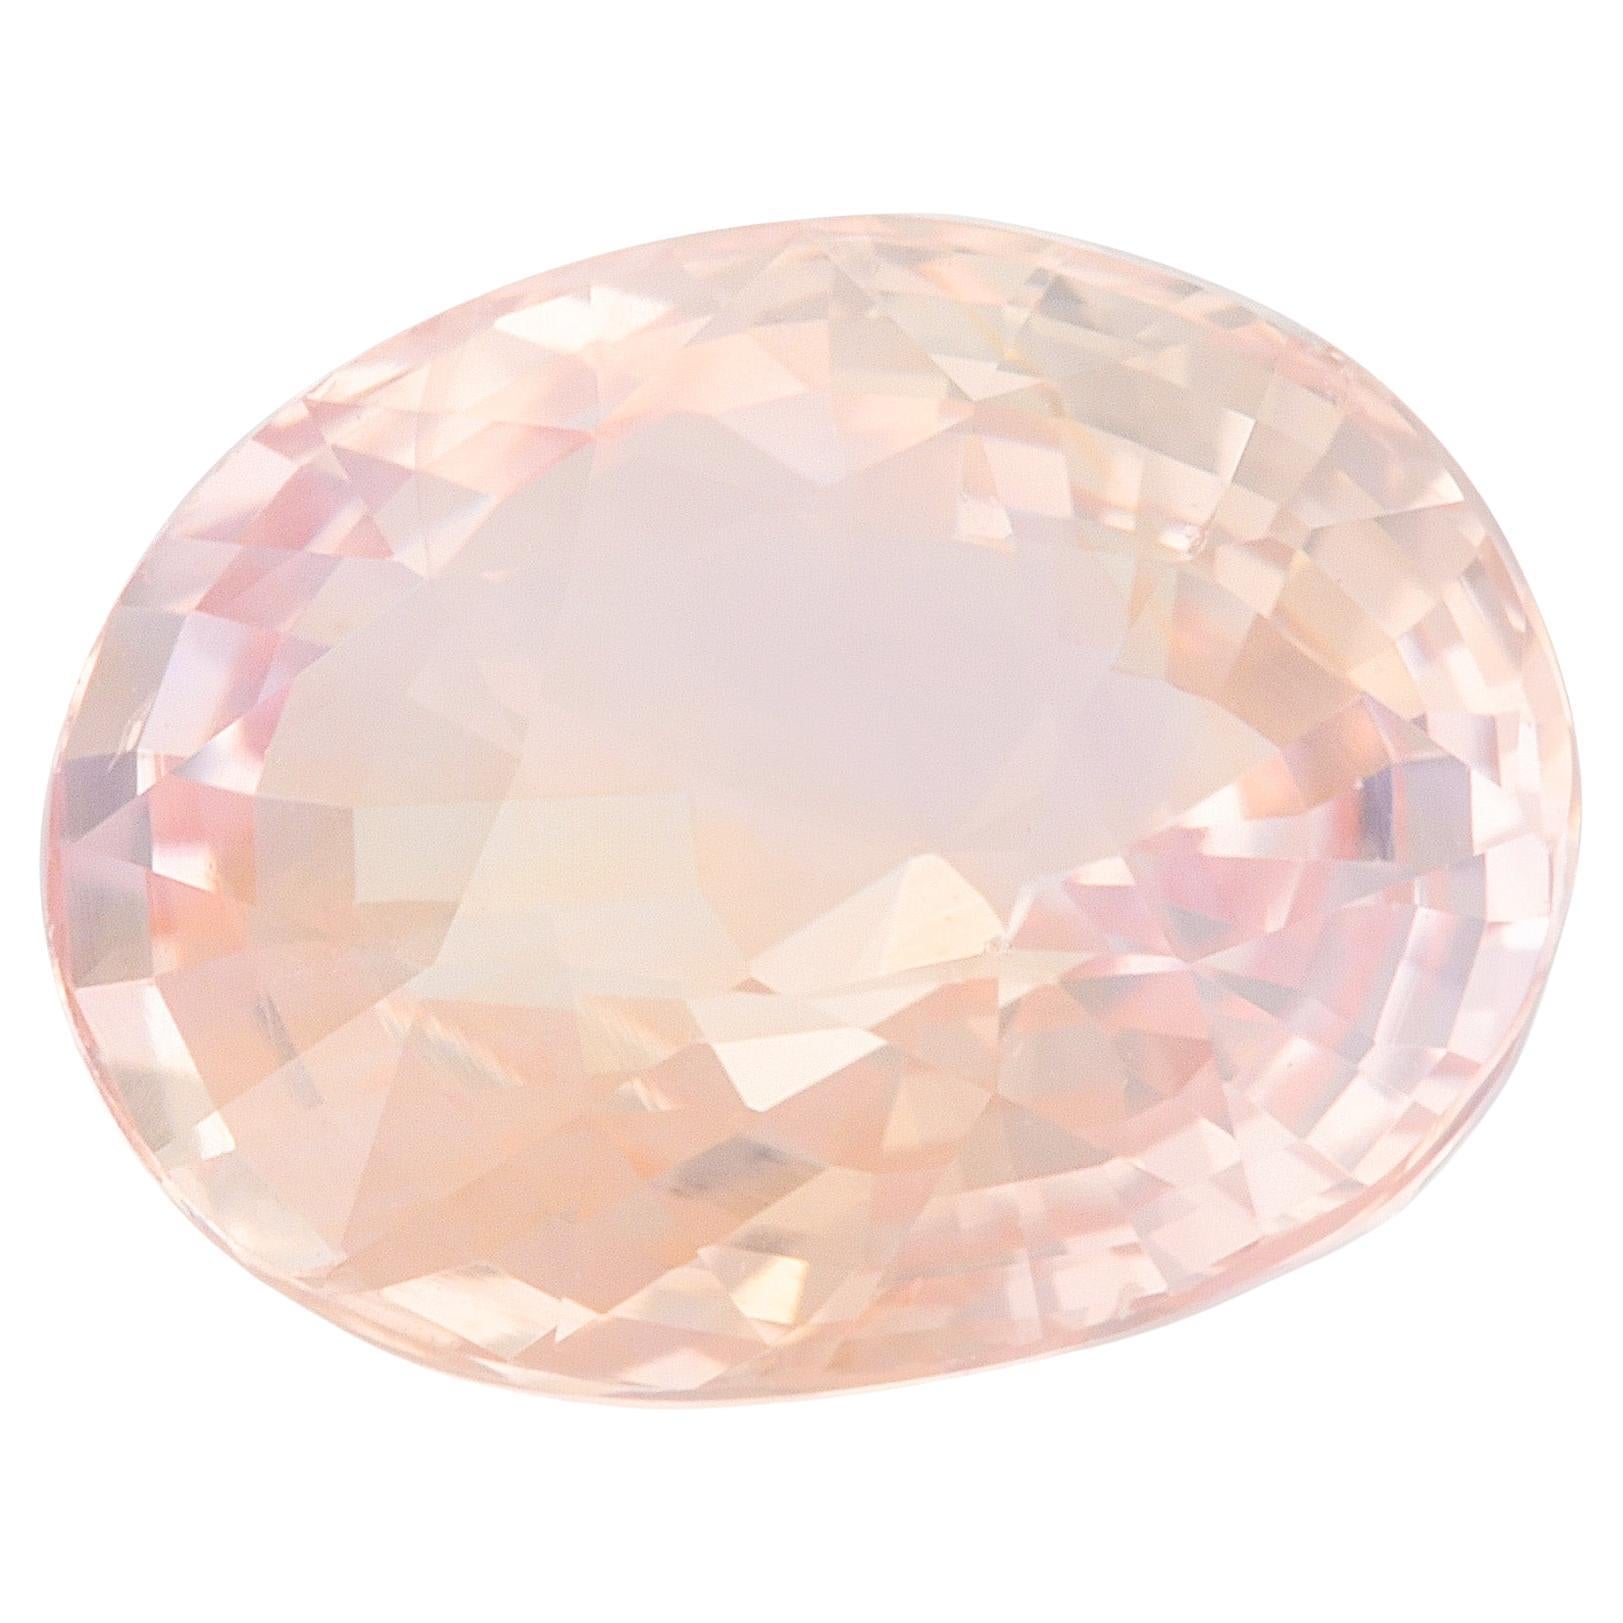 AIGS Certified 3.25 Carats Unheated Padparadscha Sapphire